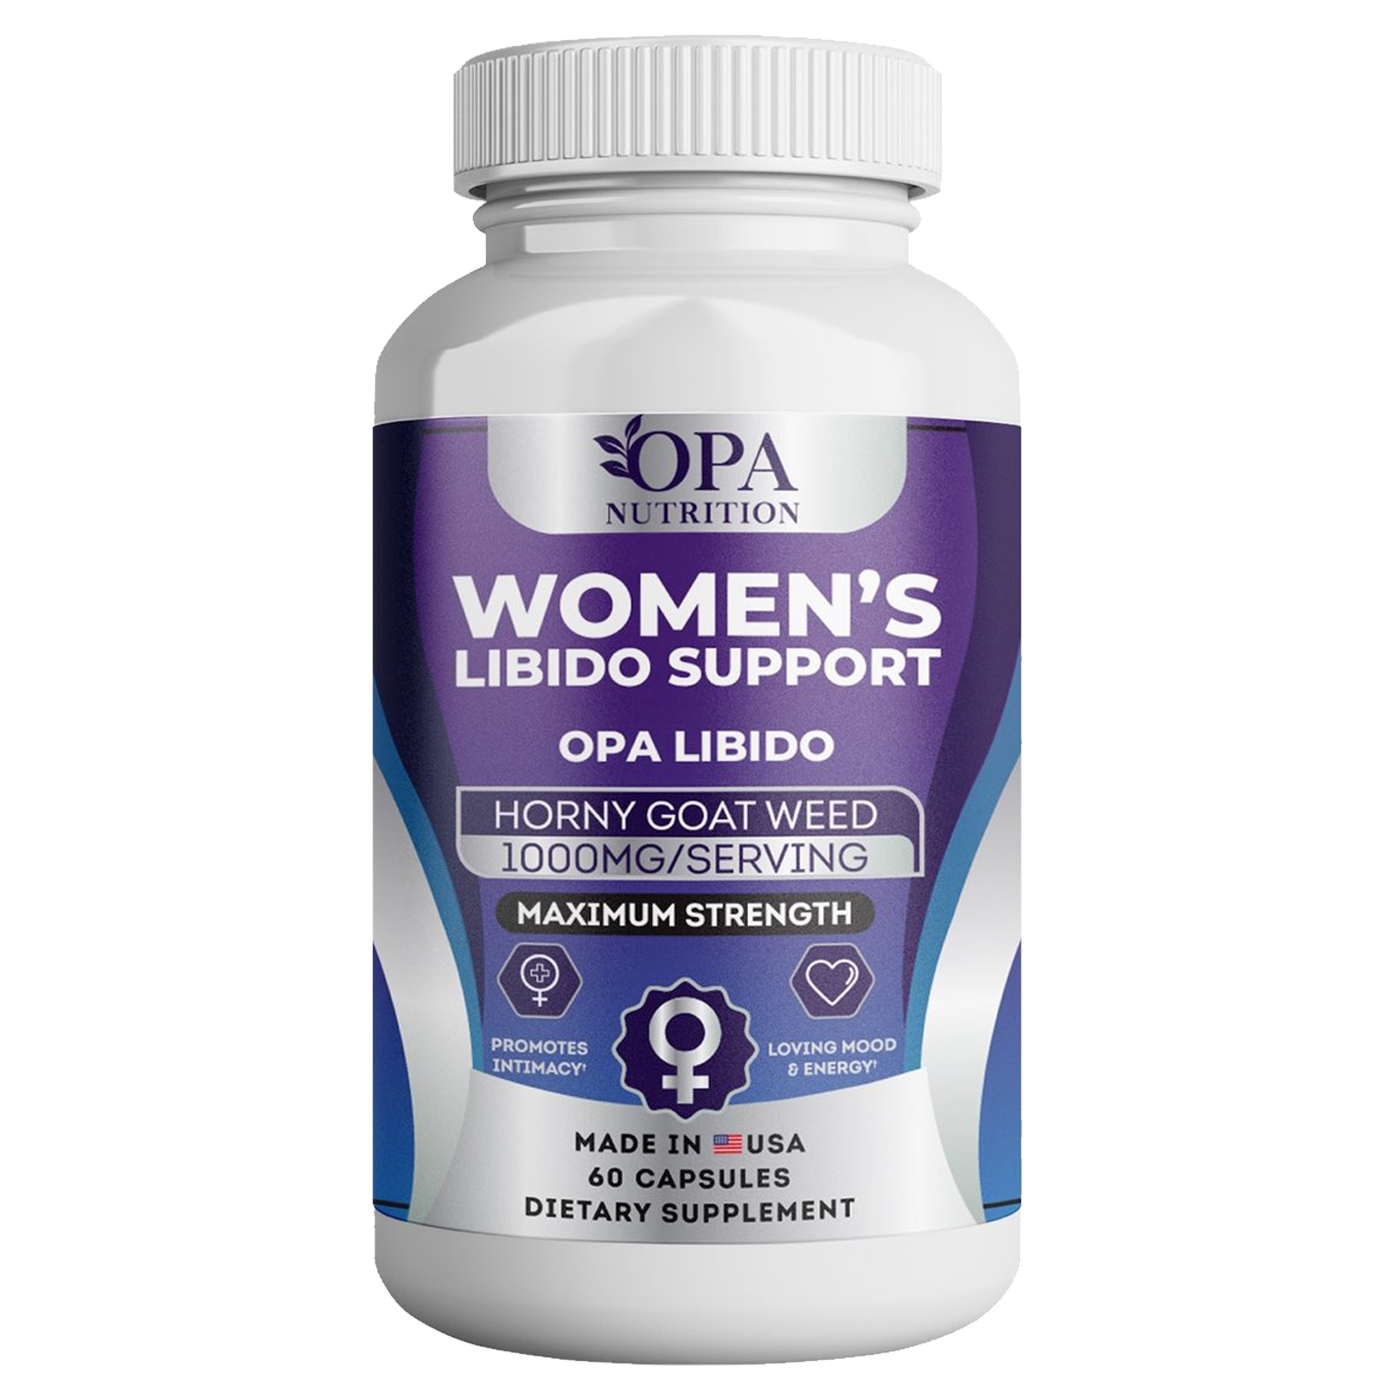 OPA Libido-Boosting Supplements For Females Mood, Energy & Desire - 60 CT